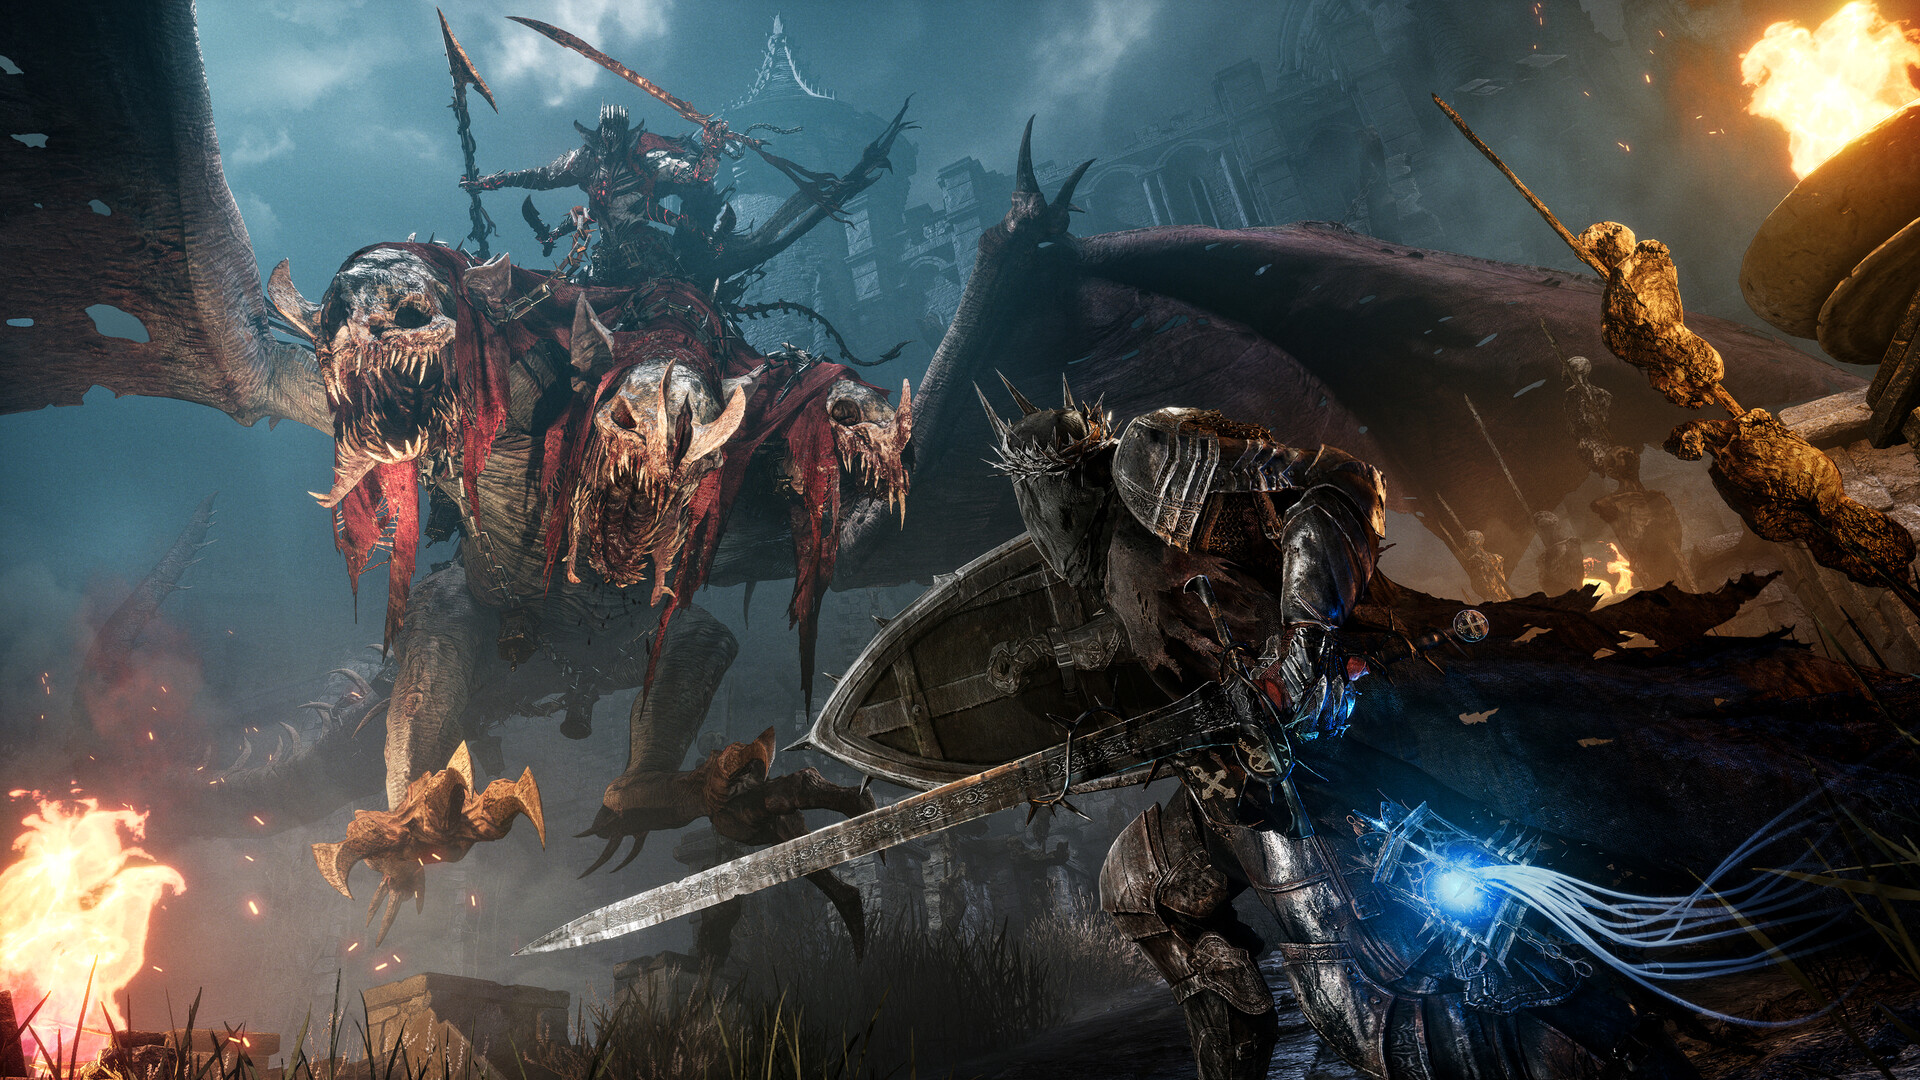 LORDS OF THE FALLEN - Official Gameplay Reveal Trailer 